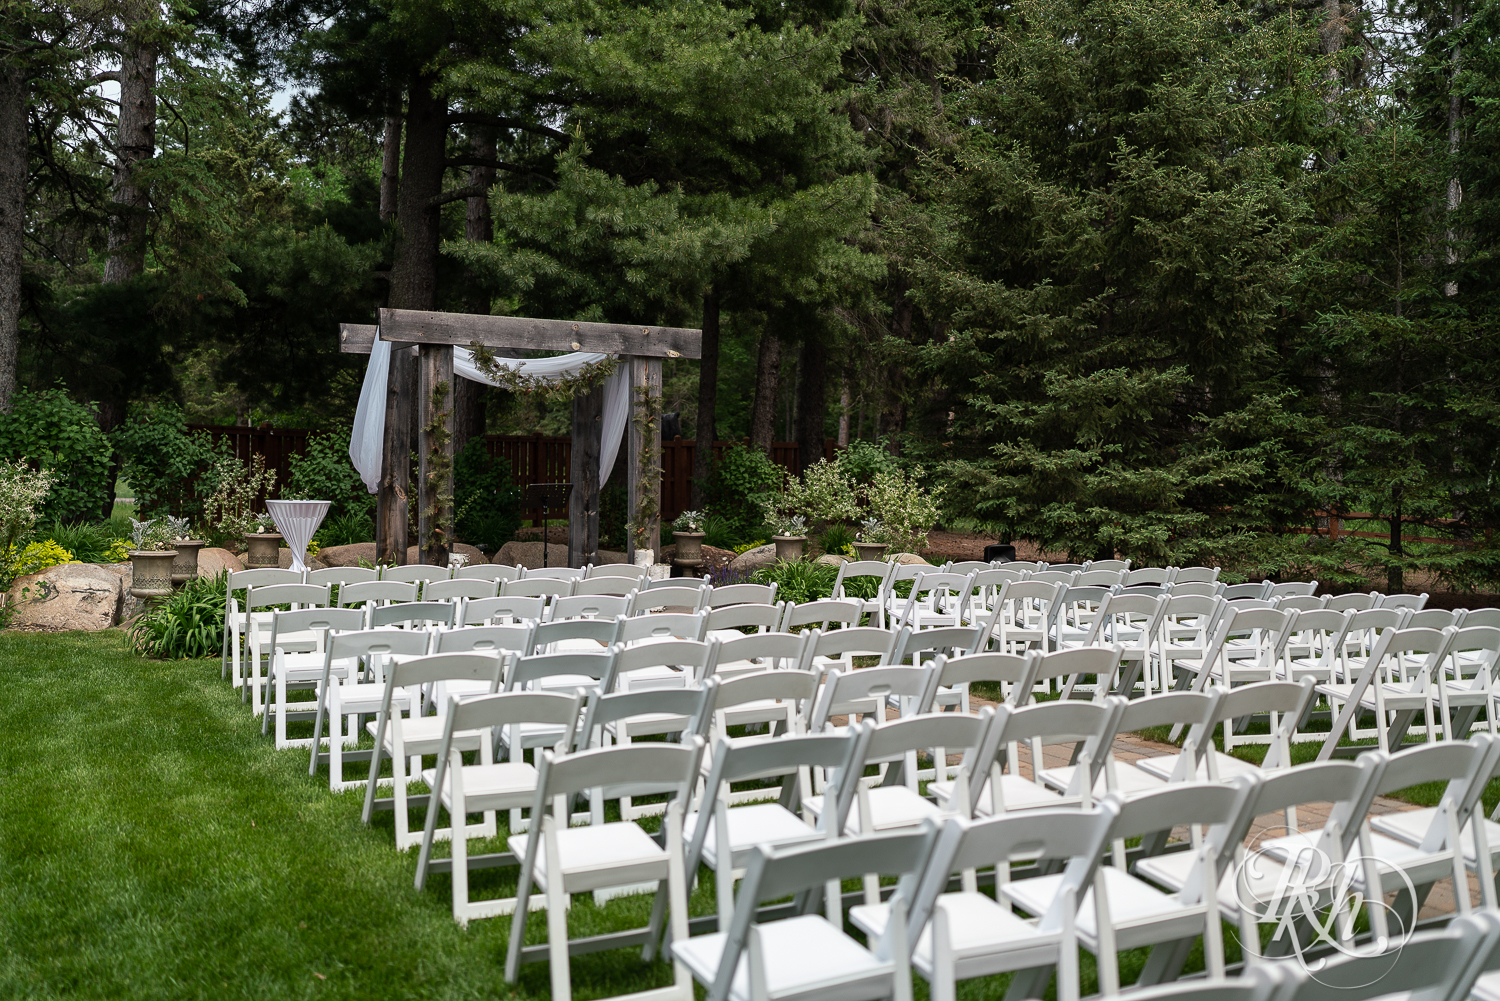 Sunny outdoor wedding ceremony setup at Pine Peaks Event Center in Pine River, Minnesota.